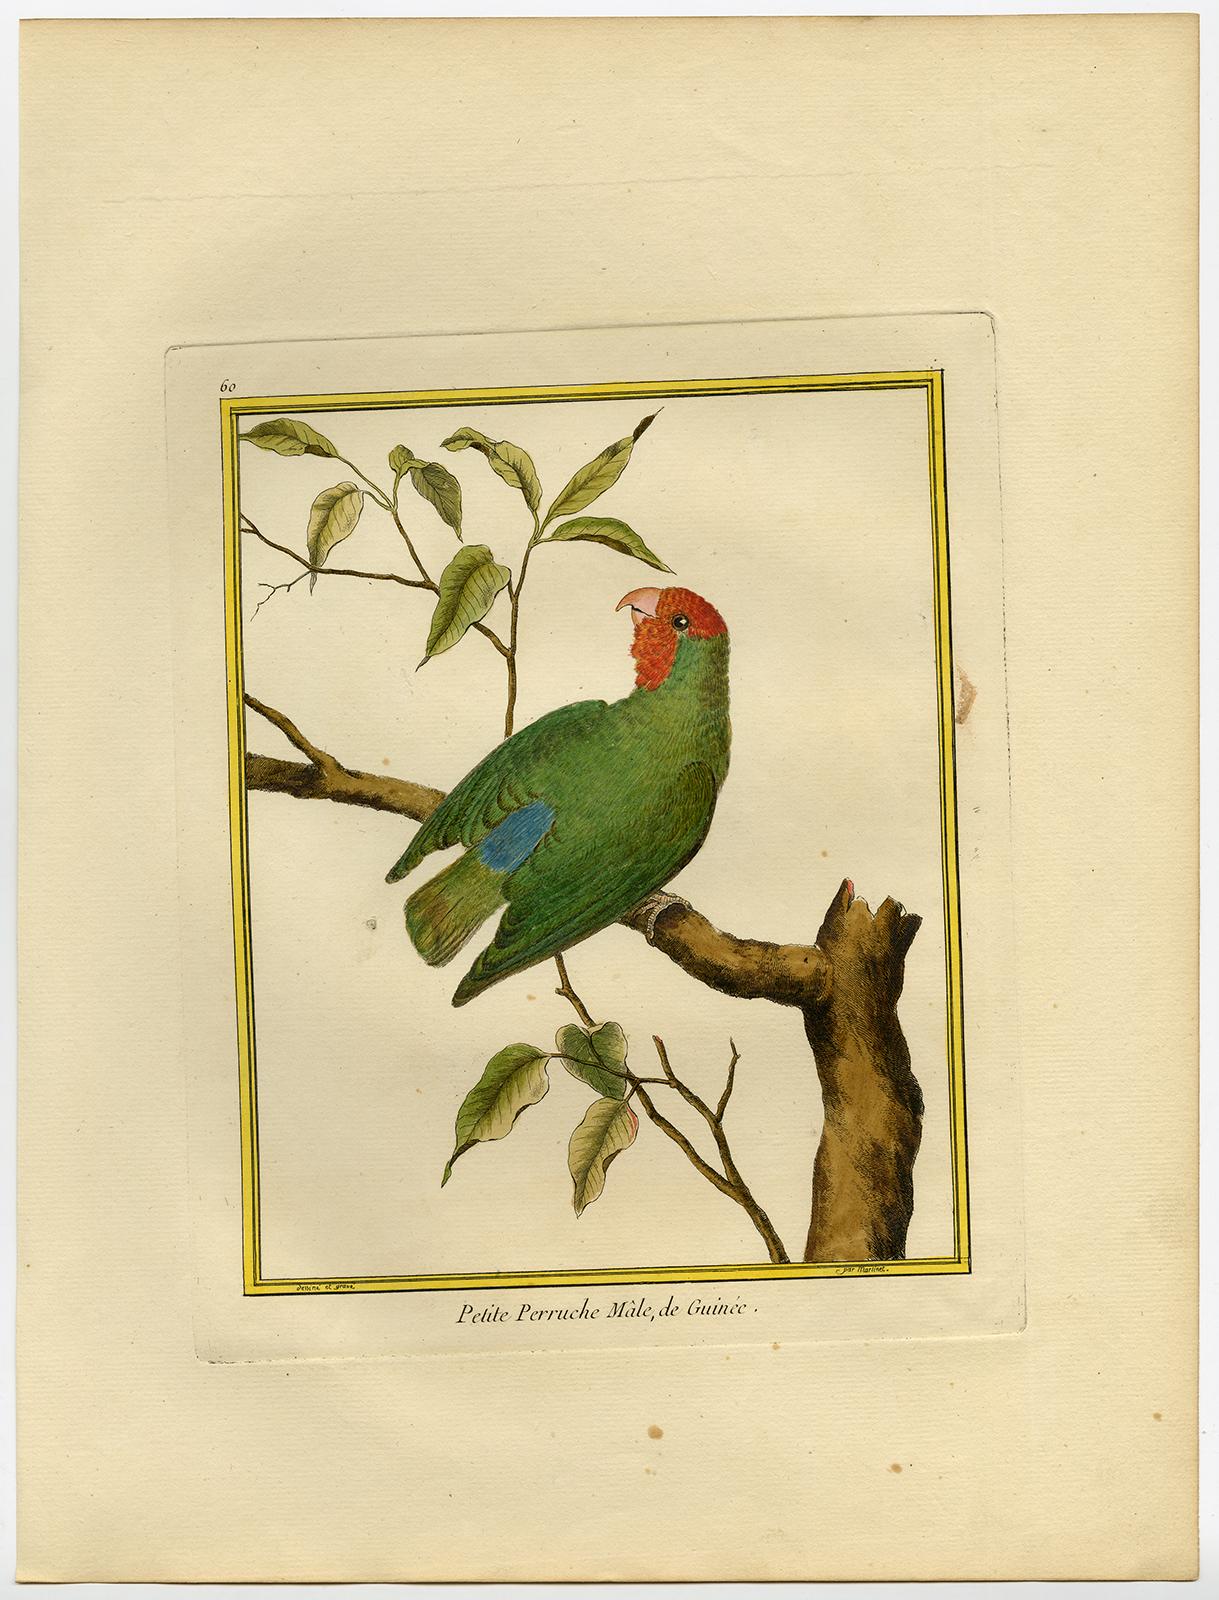 Small Parakeet from Guinea by Martinet - Handcoloured engraving - 18th century - Print by Francois Nicolas Martinet